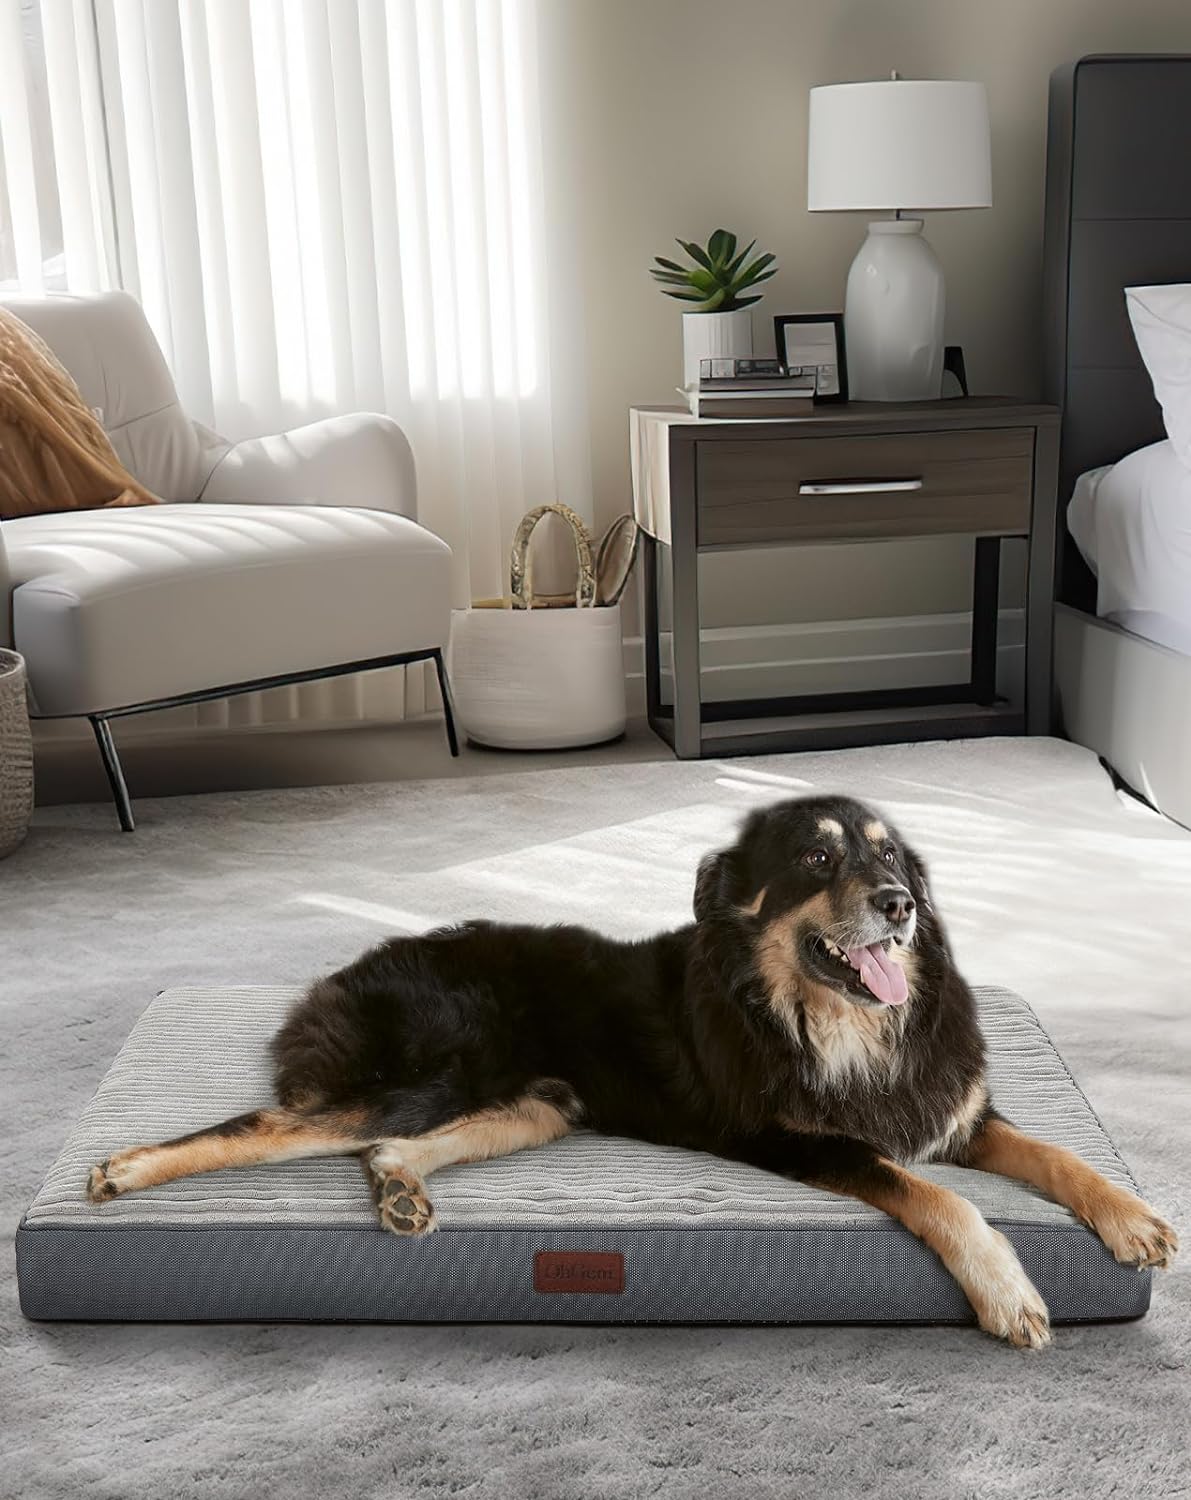 Dog Bed with Egg Crate Foam| X-Large (41 x 28 x 4 Inch)|Gray|OhGeni - aborderproducts